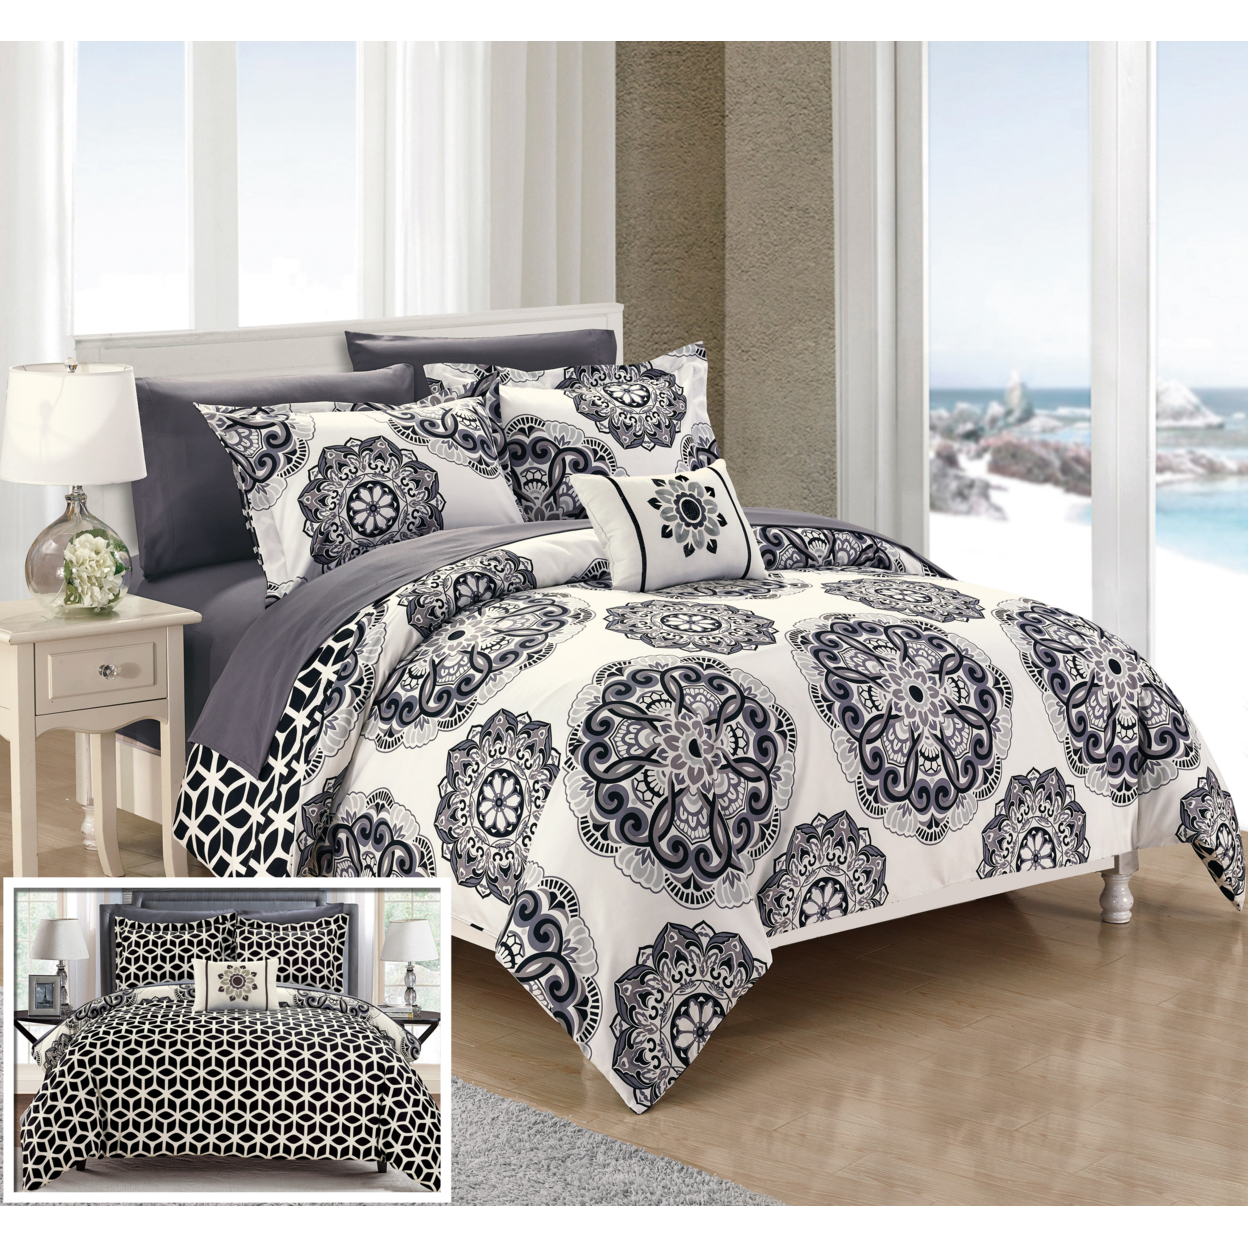 8 Or 6 Pc. Barella Super Soft Large Printed Medallion REVERSIBLE With Geometric Printed Backing Comforter Set - Black, Queen